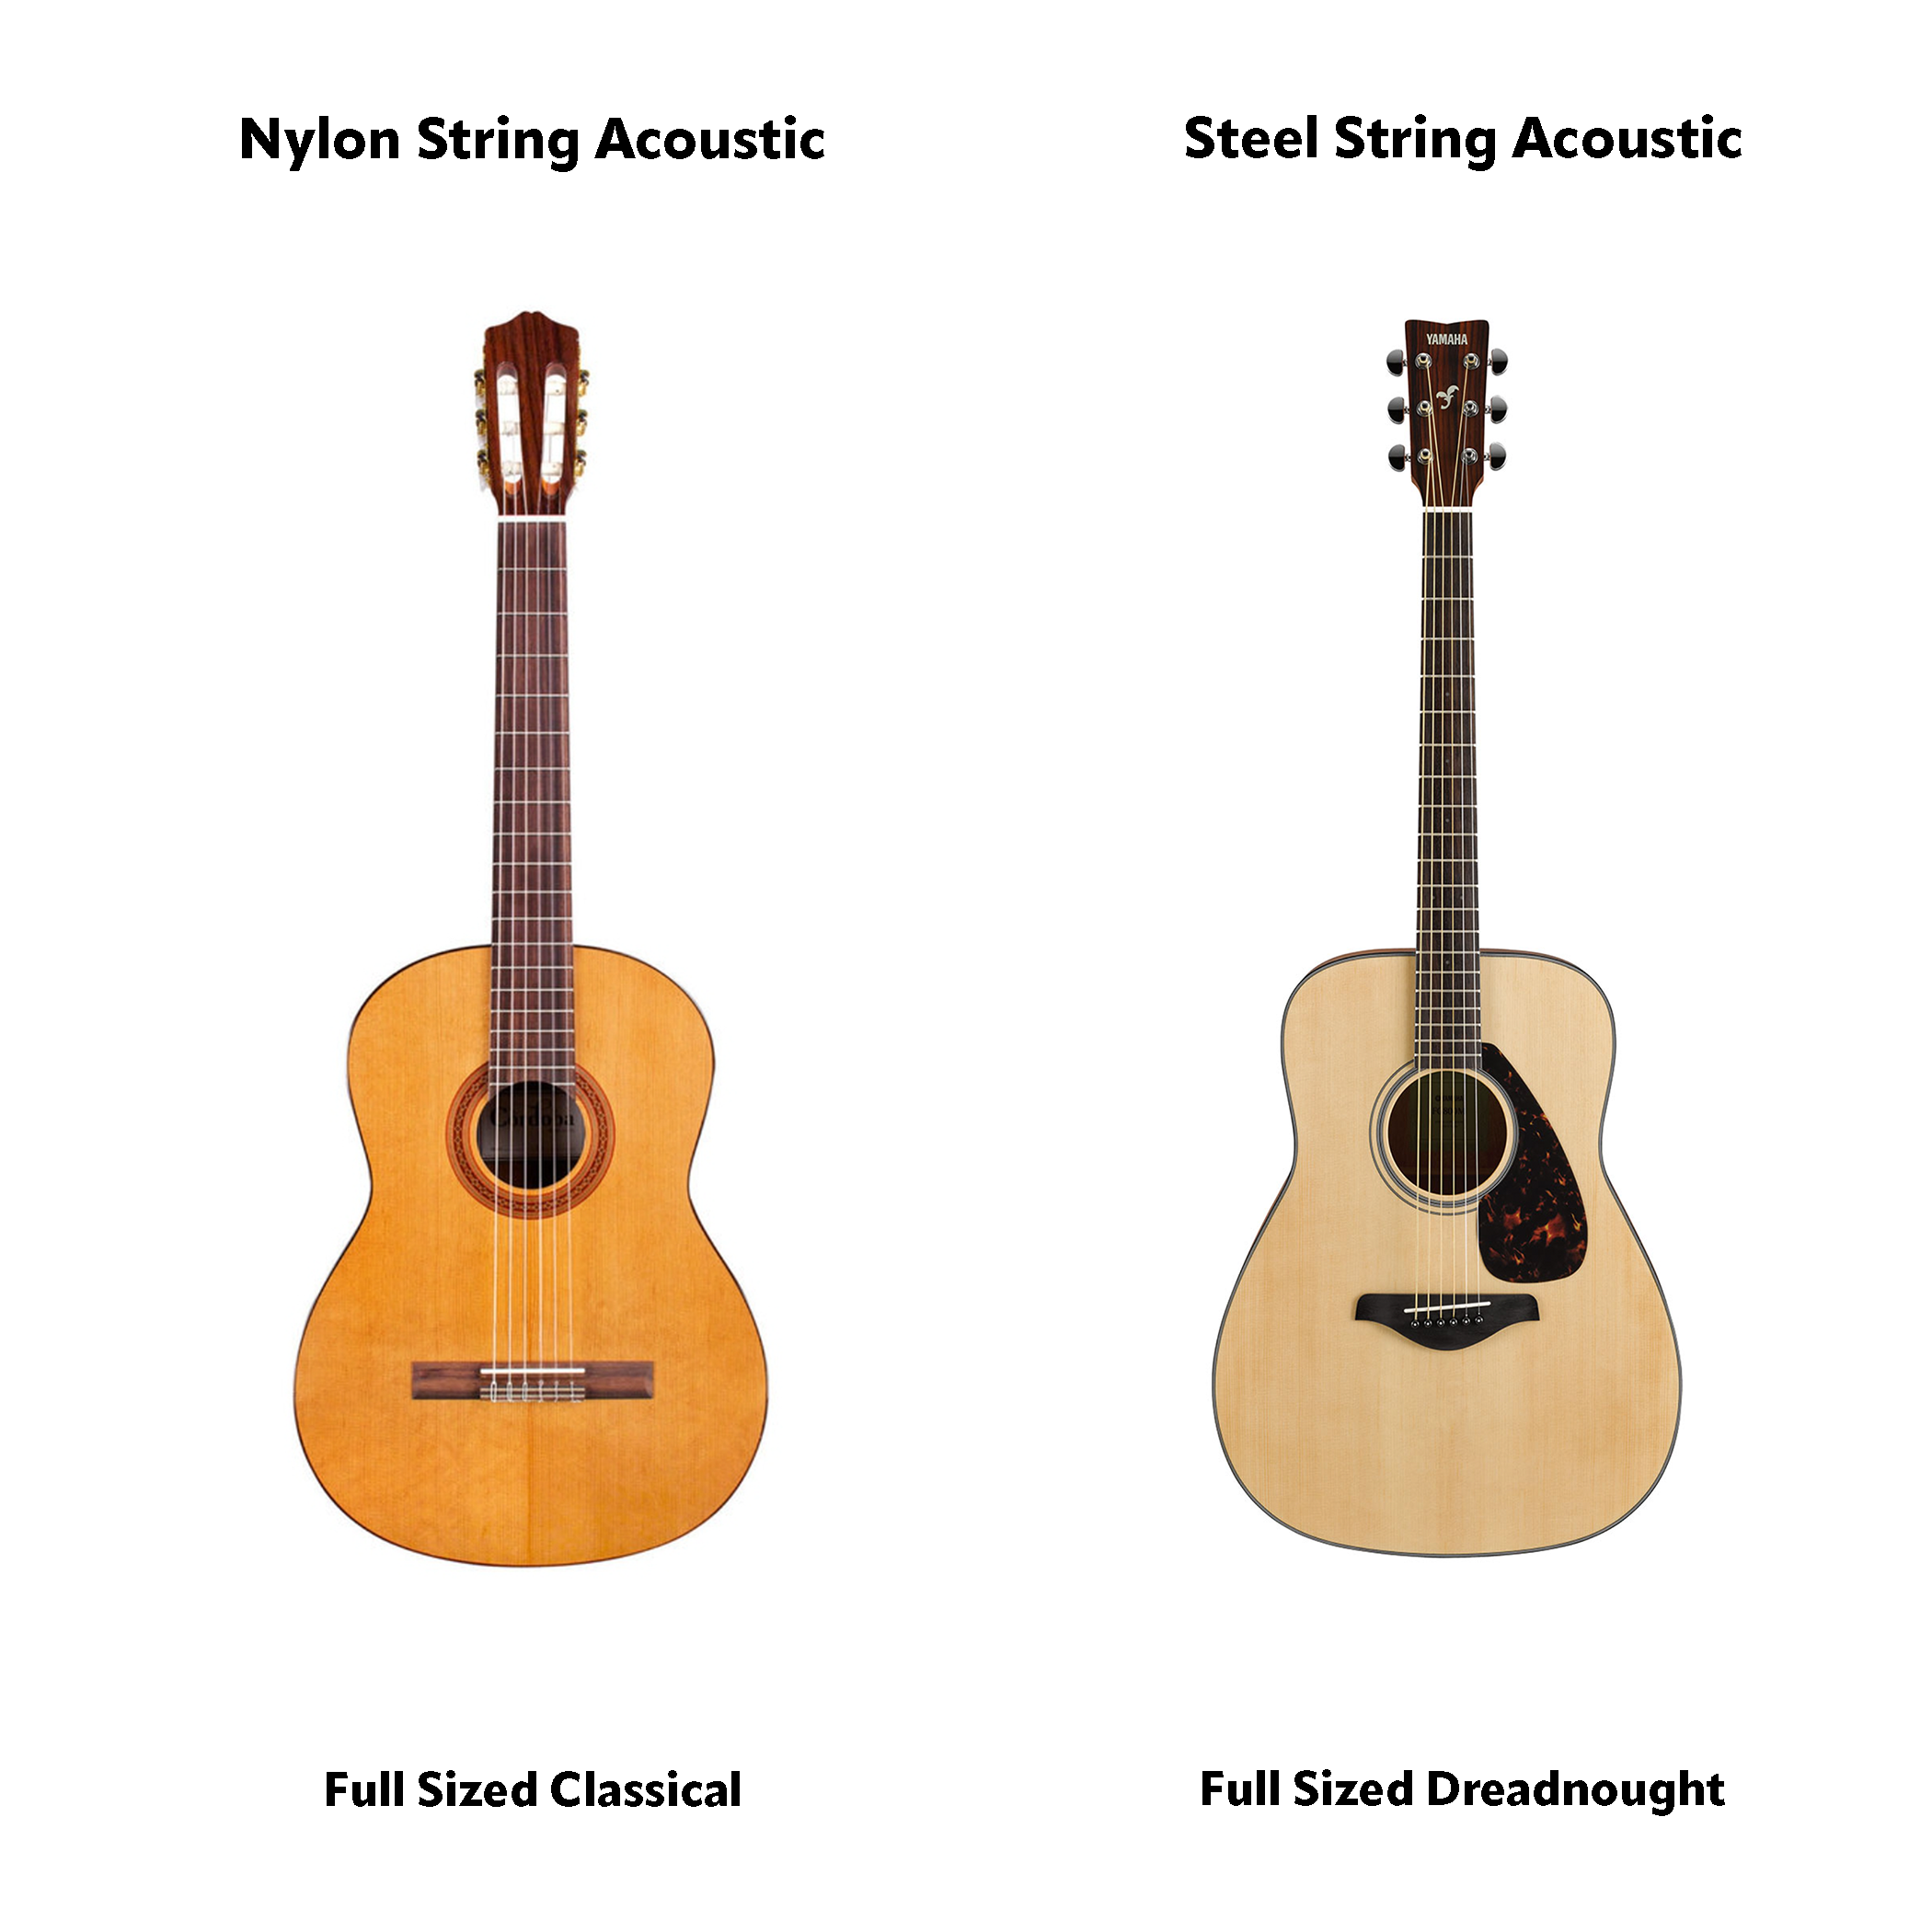 The Structure of the Acoustic Guitar：The rule of strings and